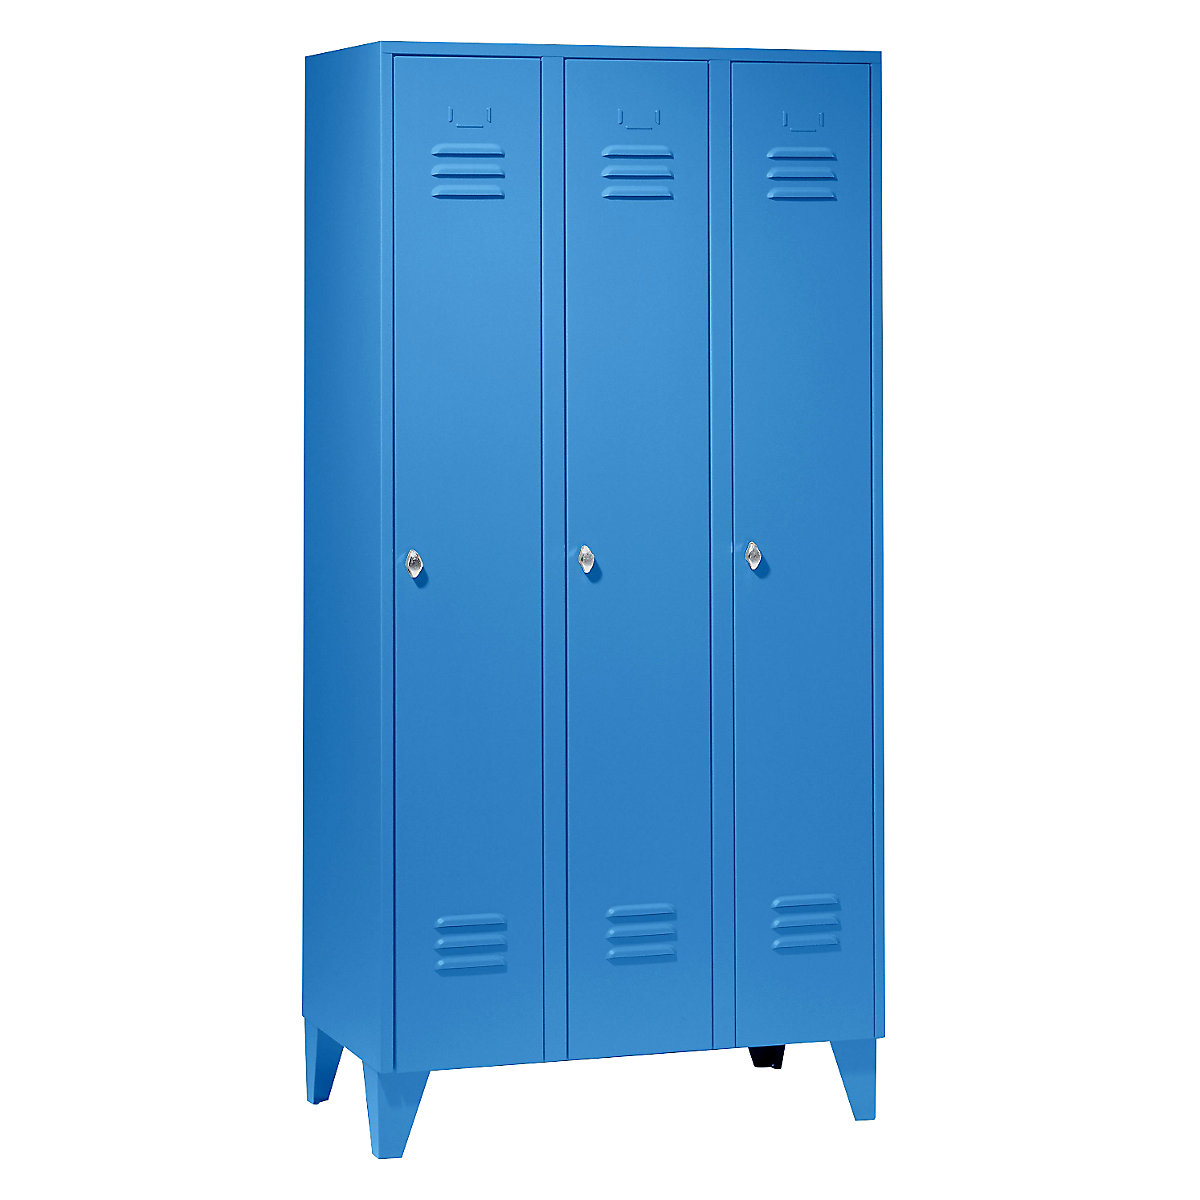 Steel locker with stud feet – Wolf, full height compartments, solid doors, compartment width 300 mm, 3 compartments, light blue-68